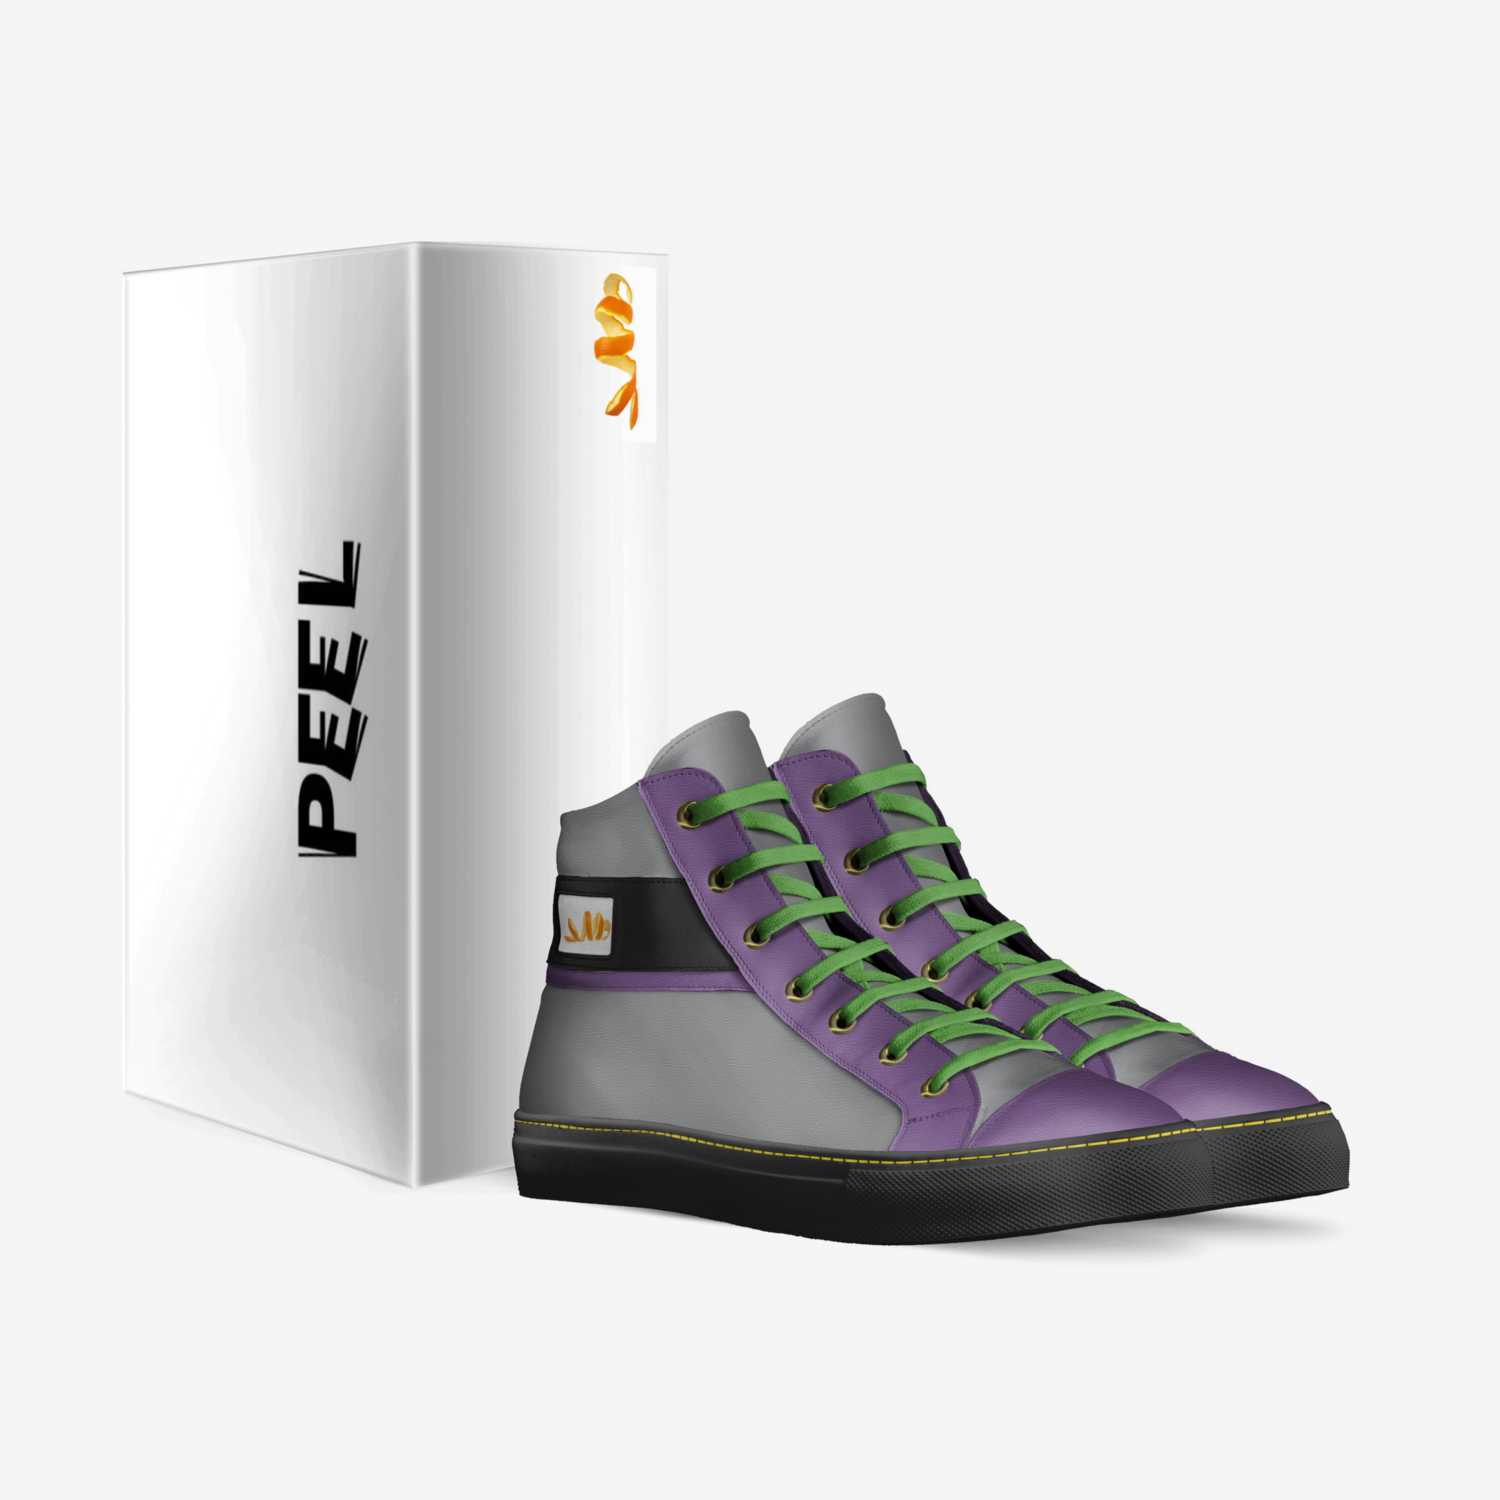 PEEL vol.1 custom made in Italy shoes by Egg Yolk | Box view